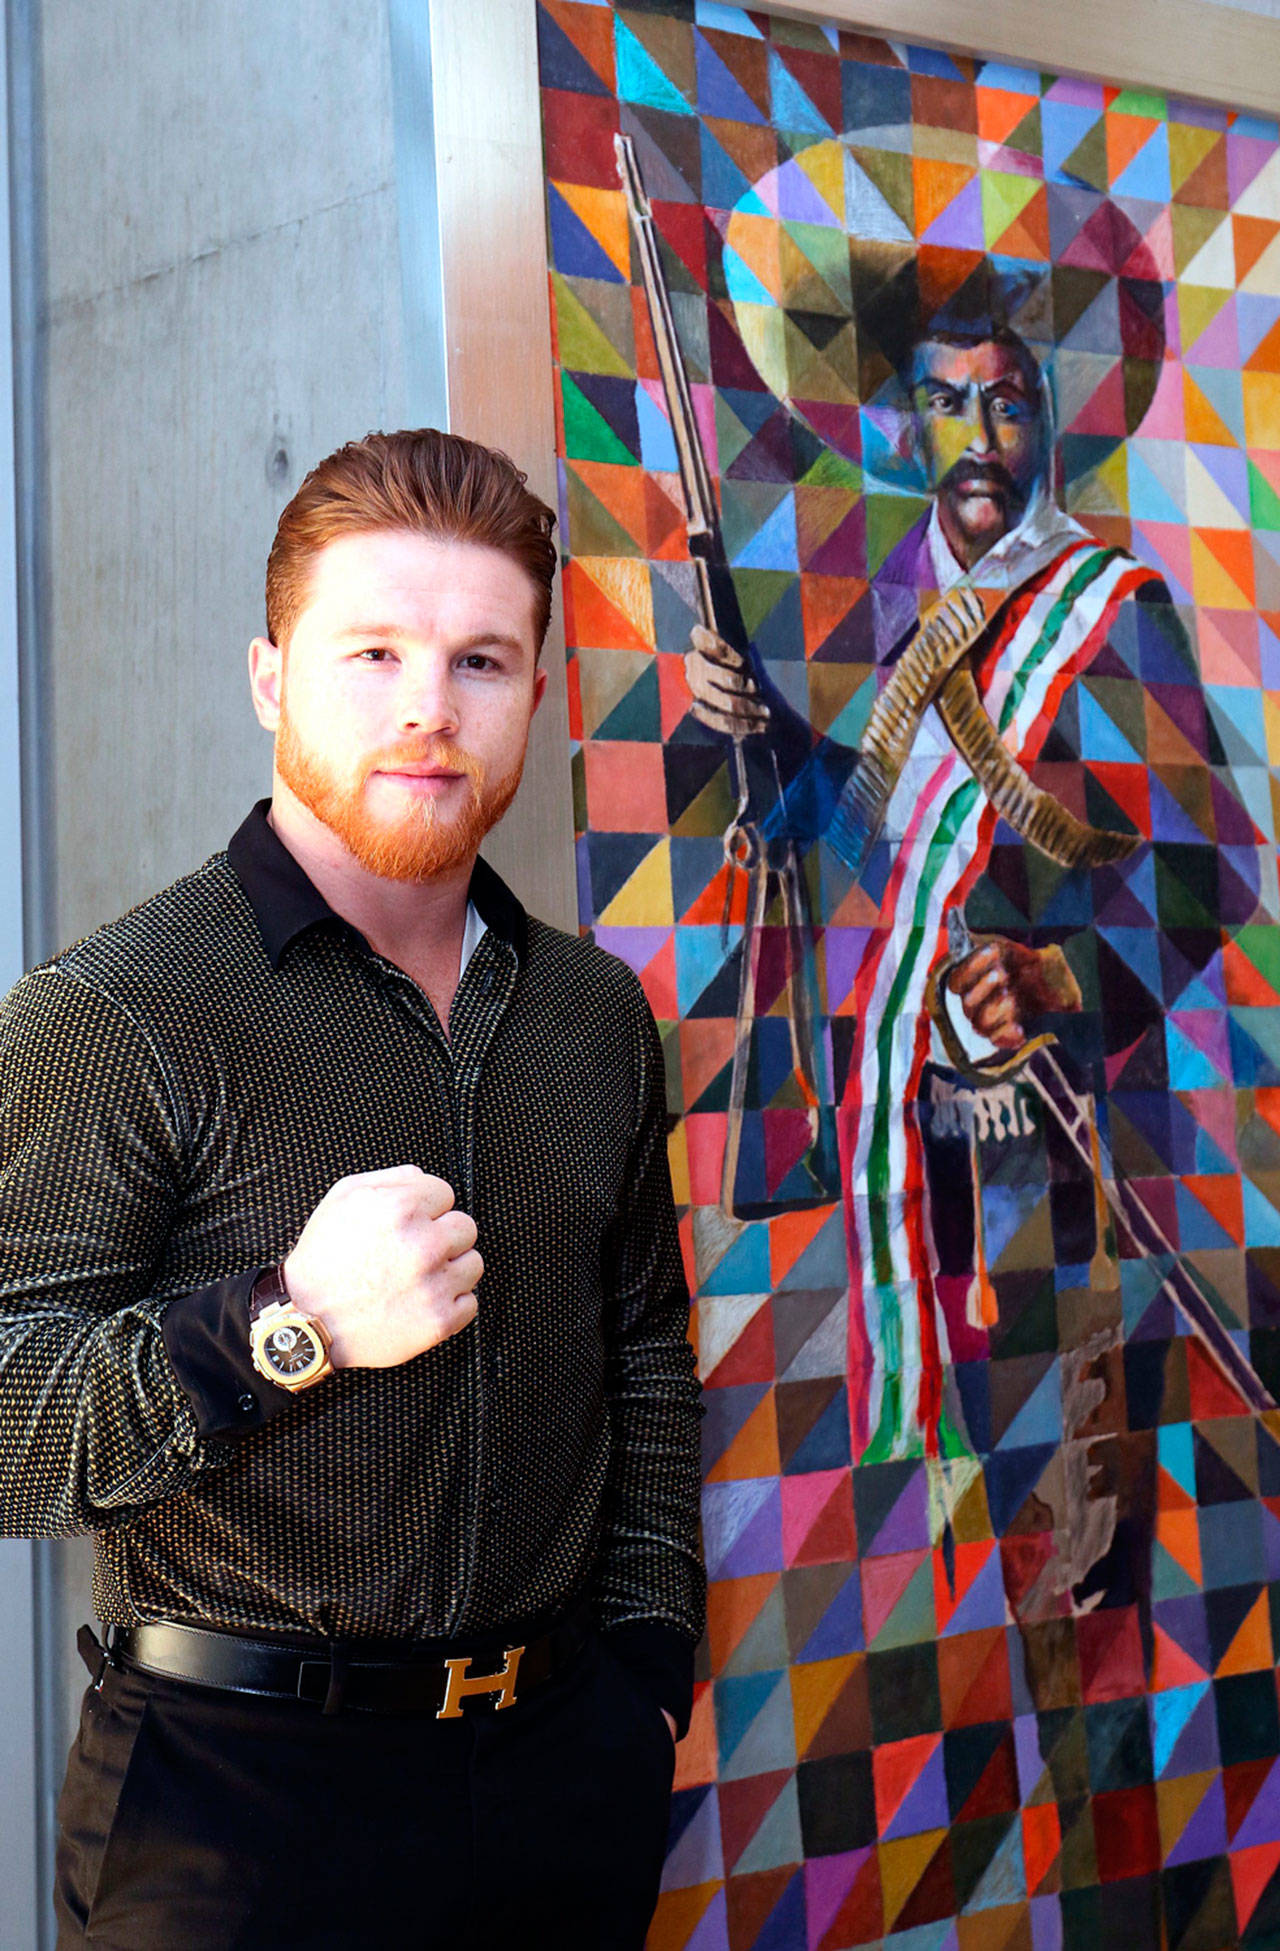 Busca Canelo triunfo indiscutible ante GGG